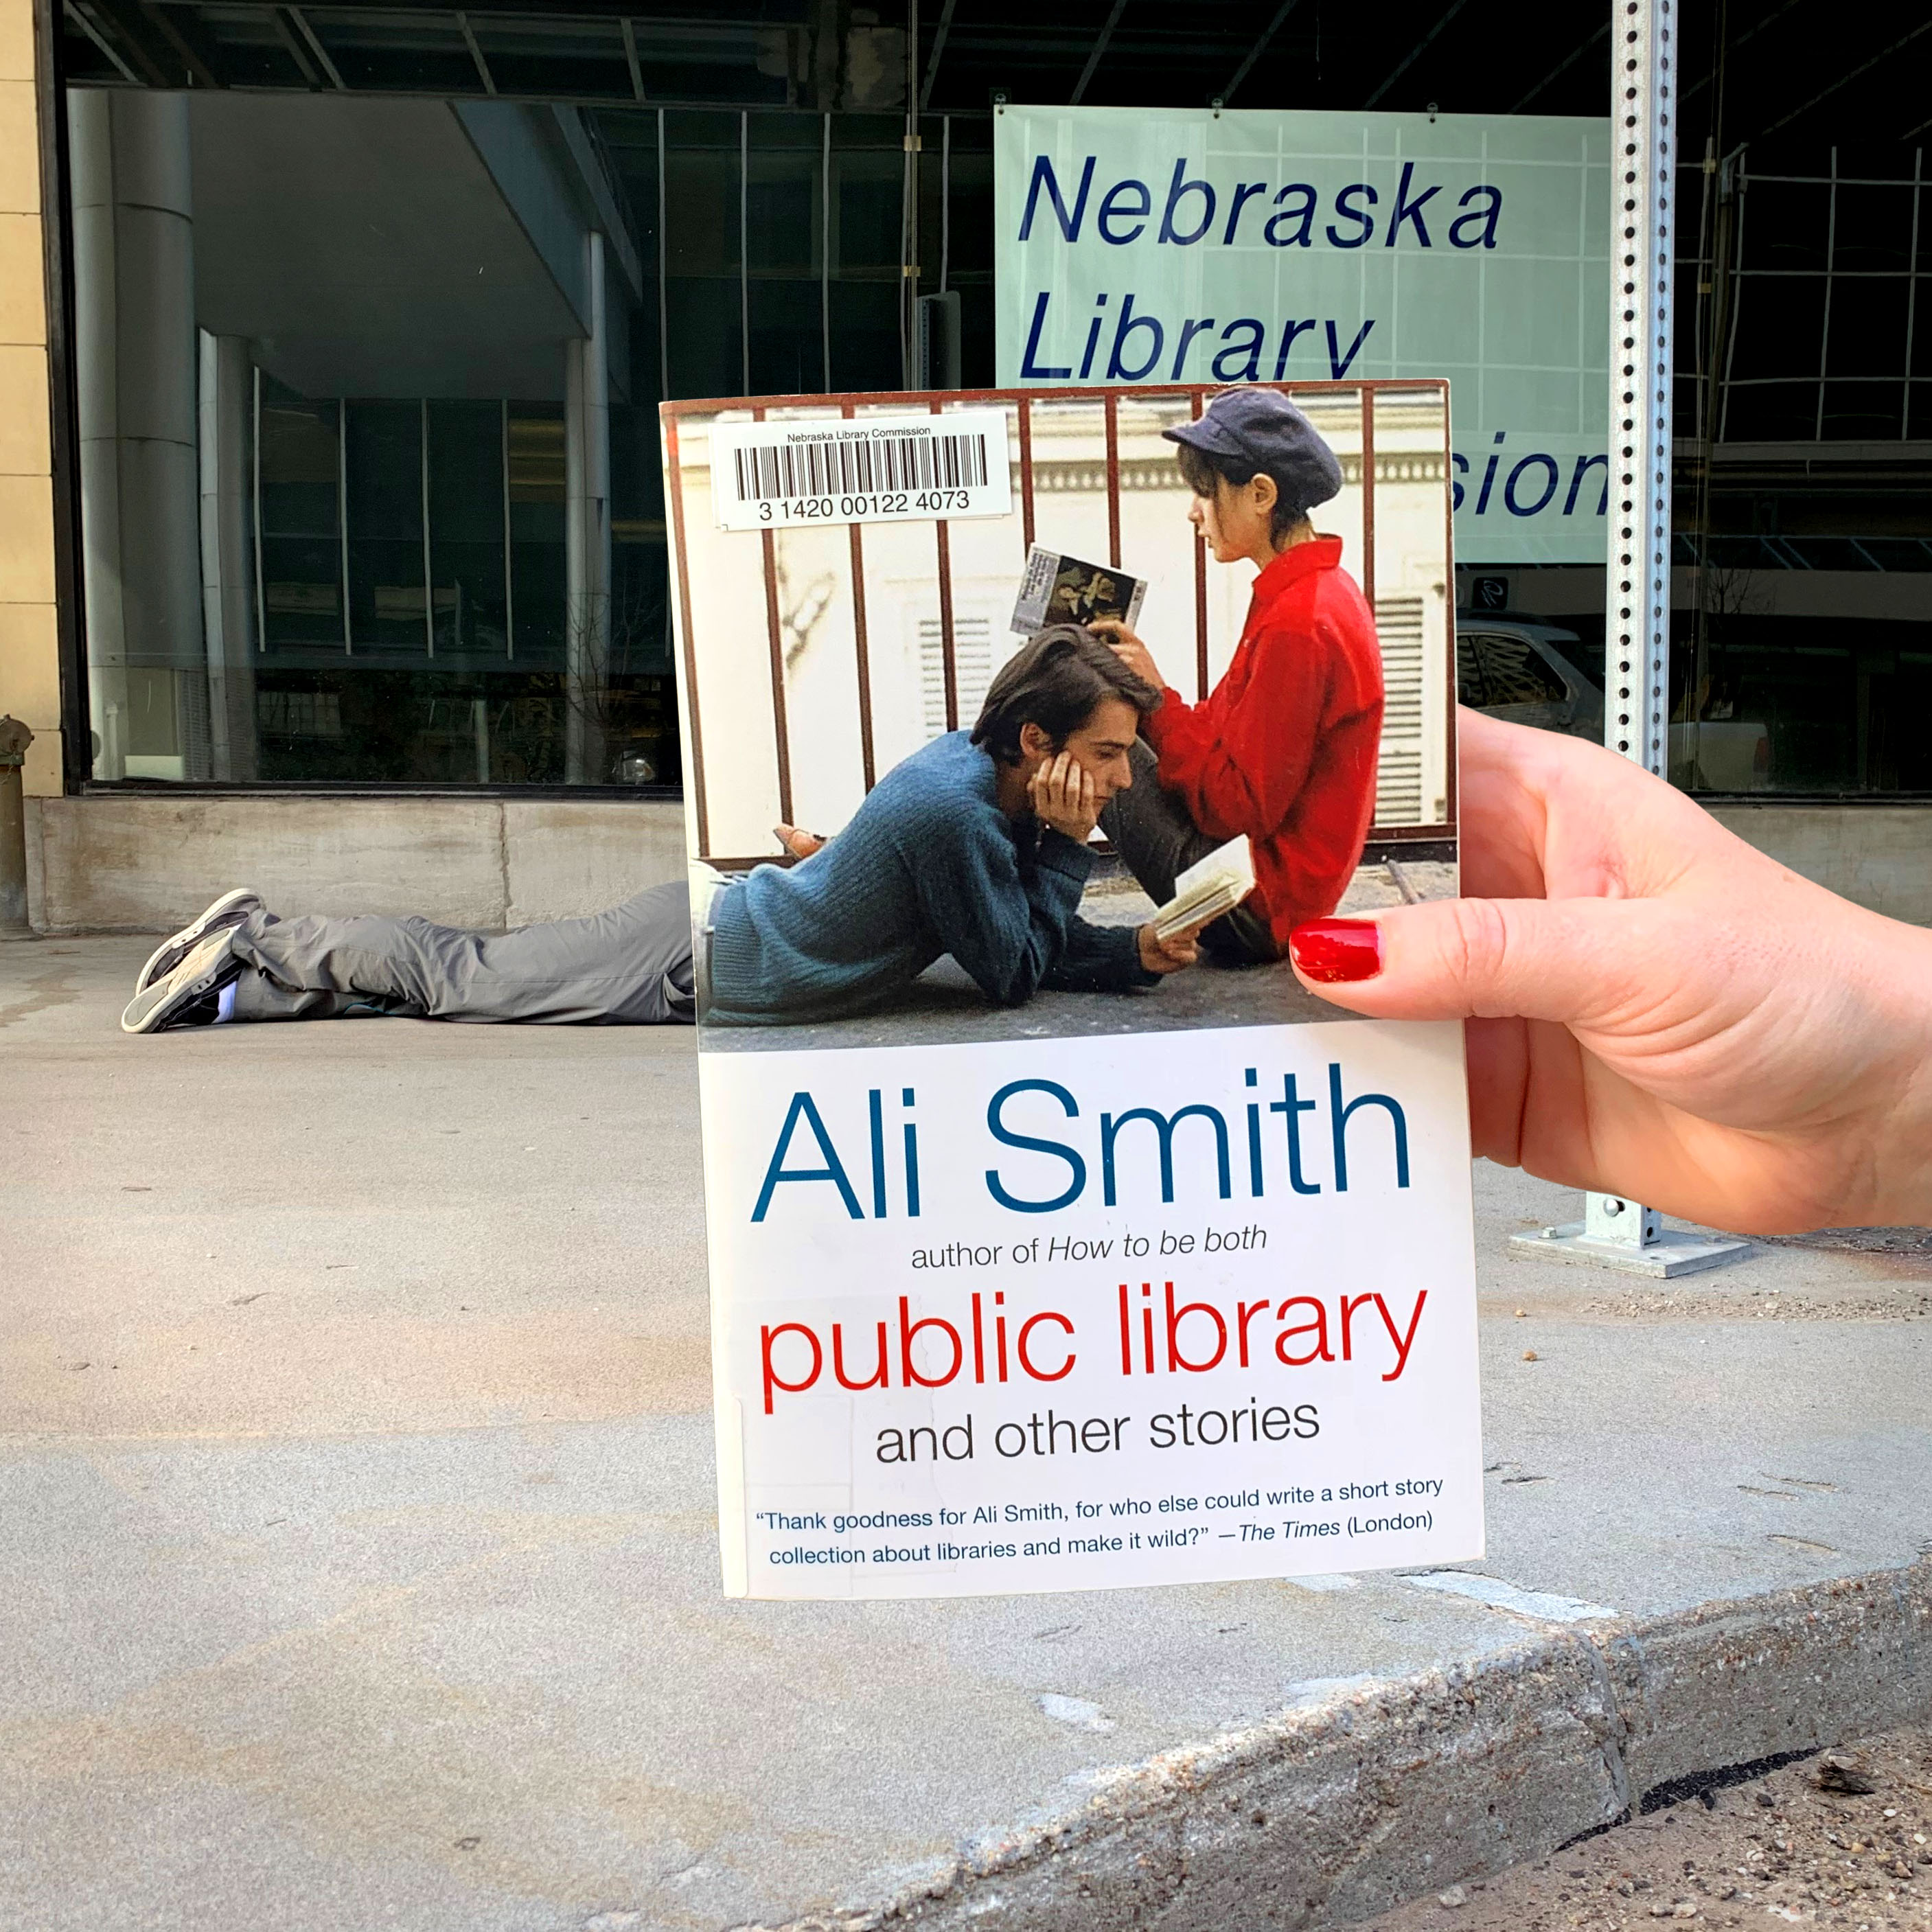 Public Library and Other Stories by Ali Smith Book Face photo